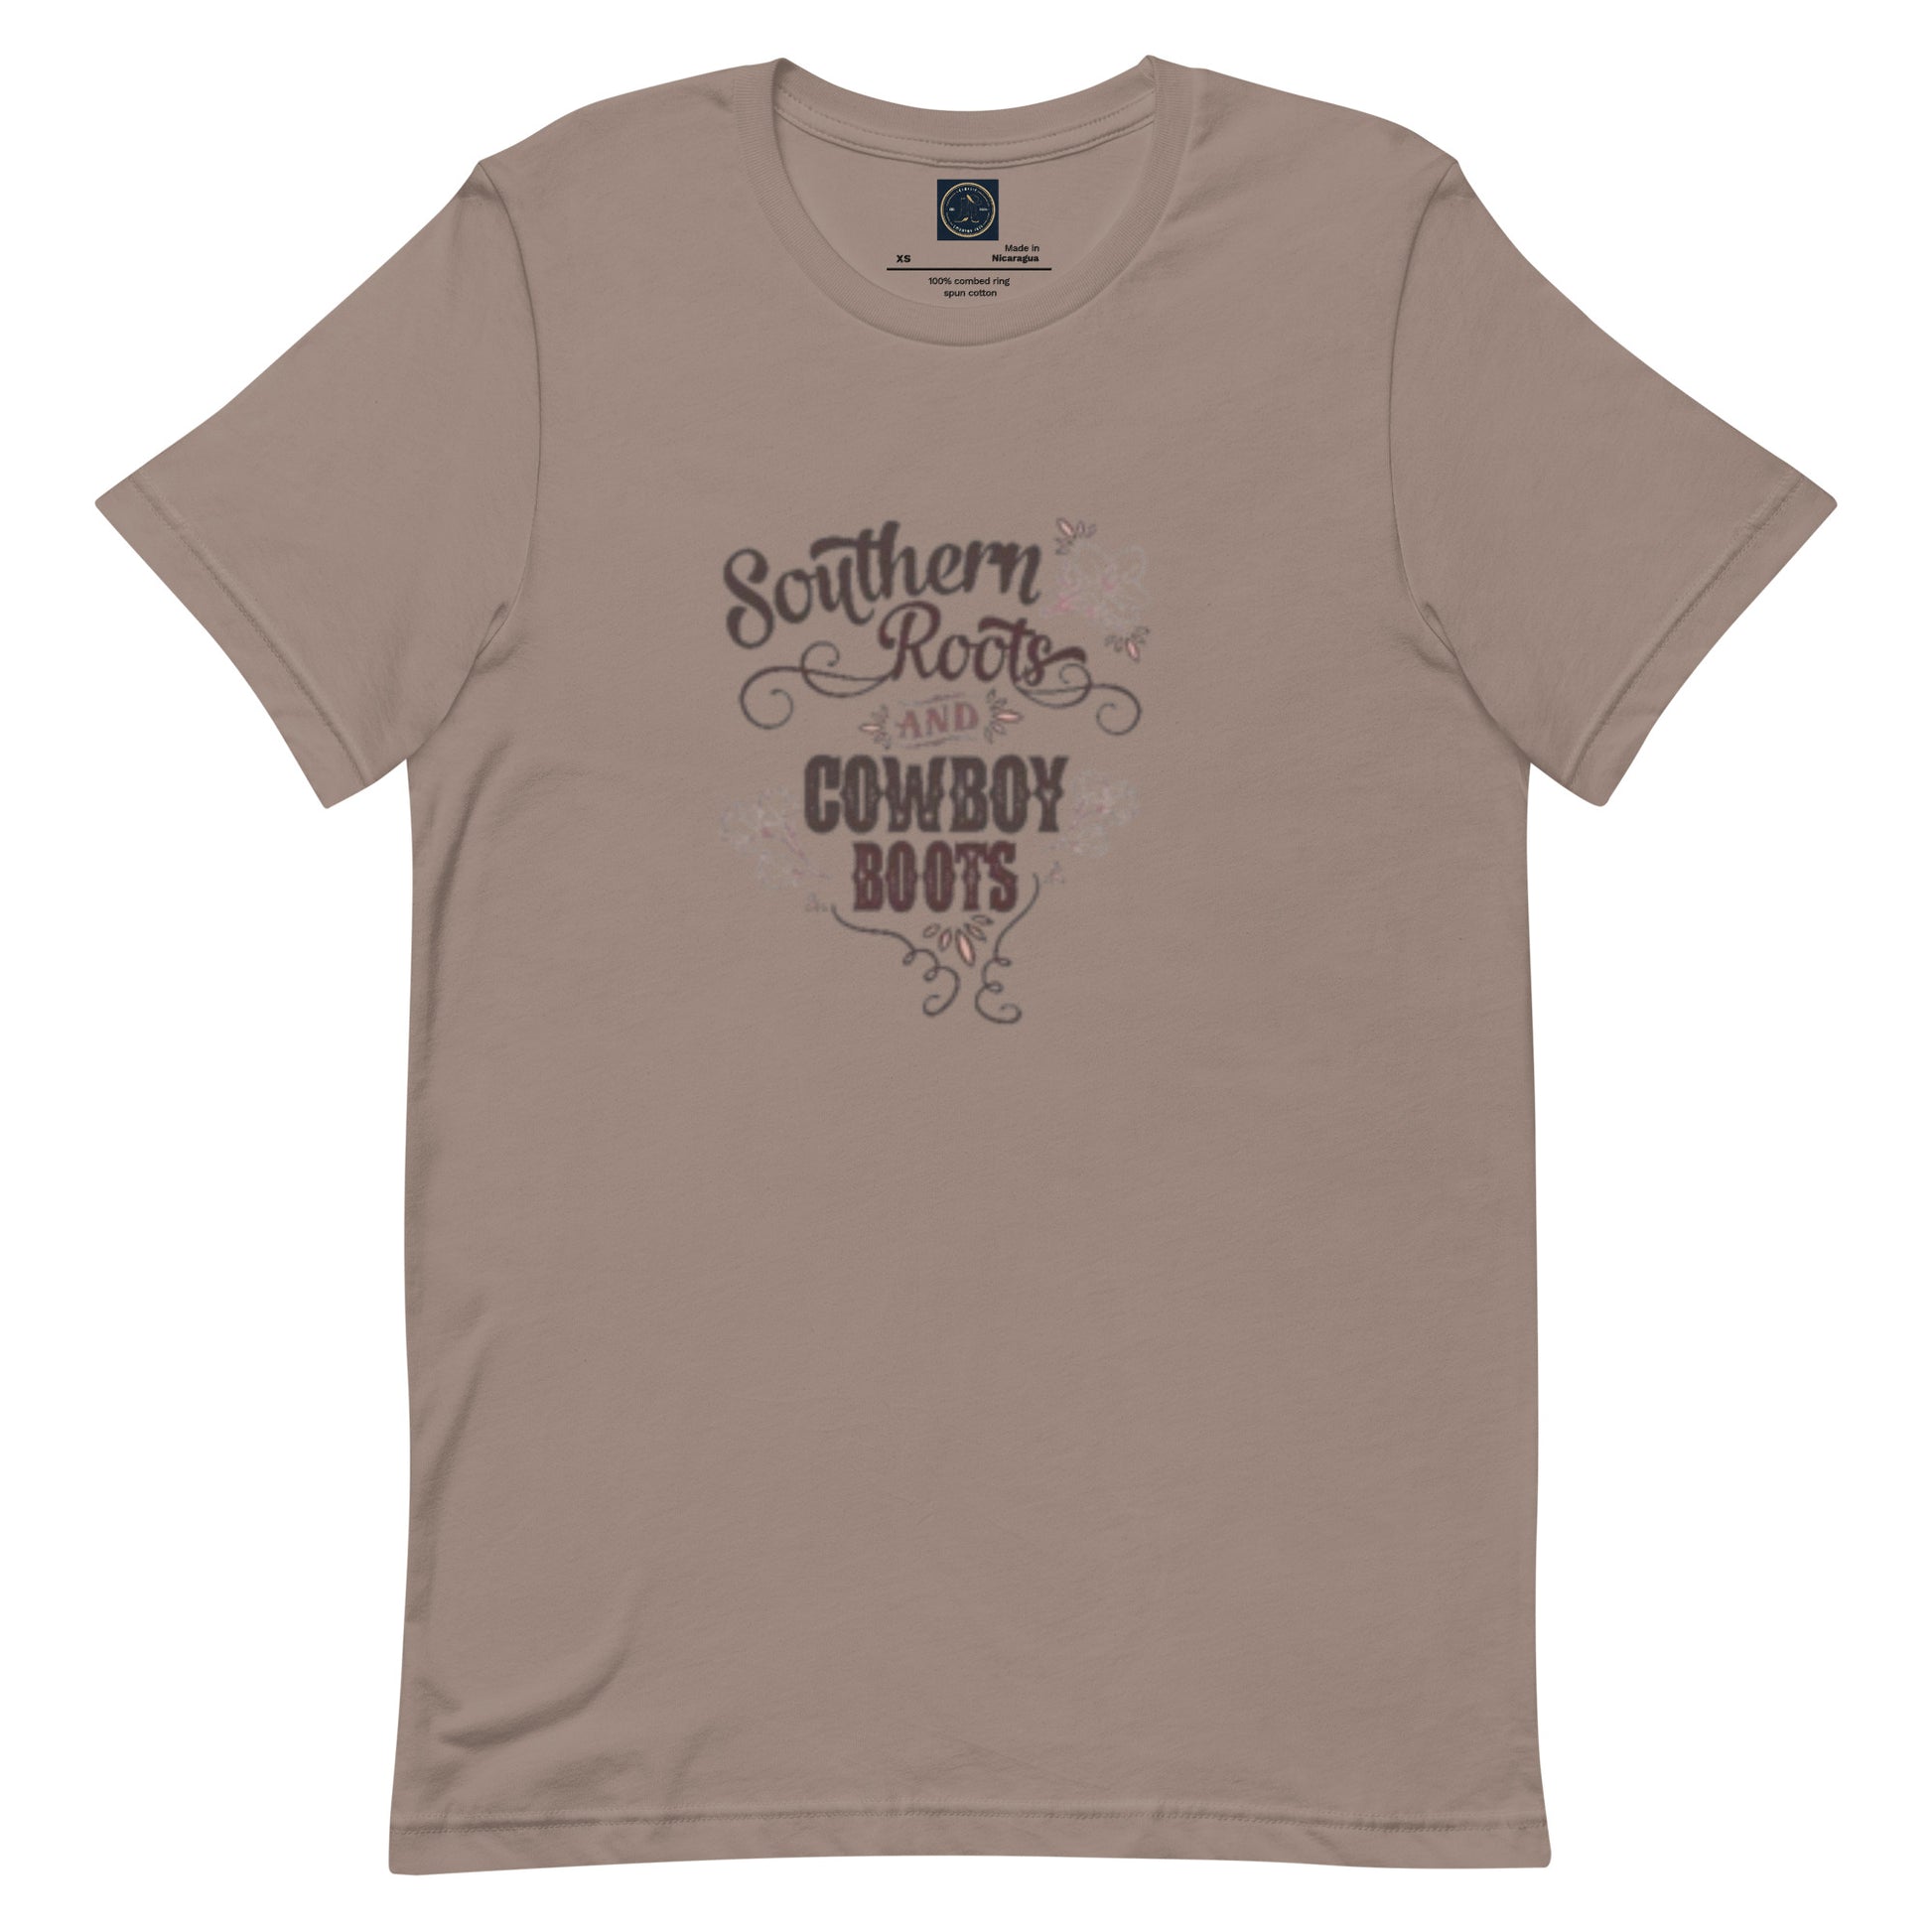 Roots & Boots - Classic Country Tees